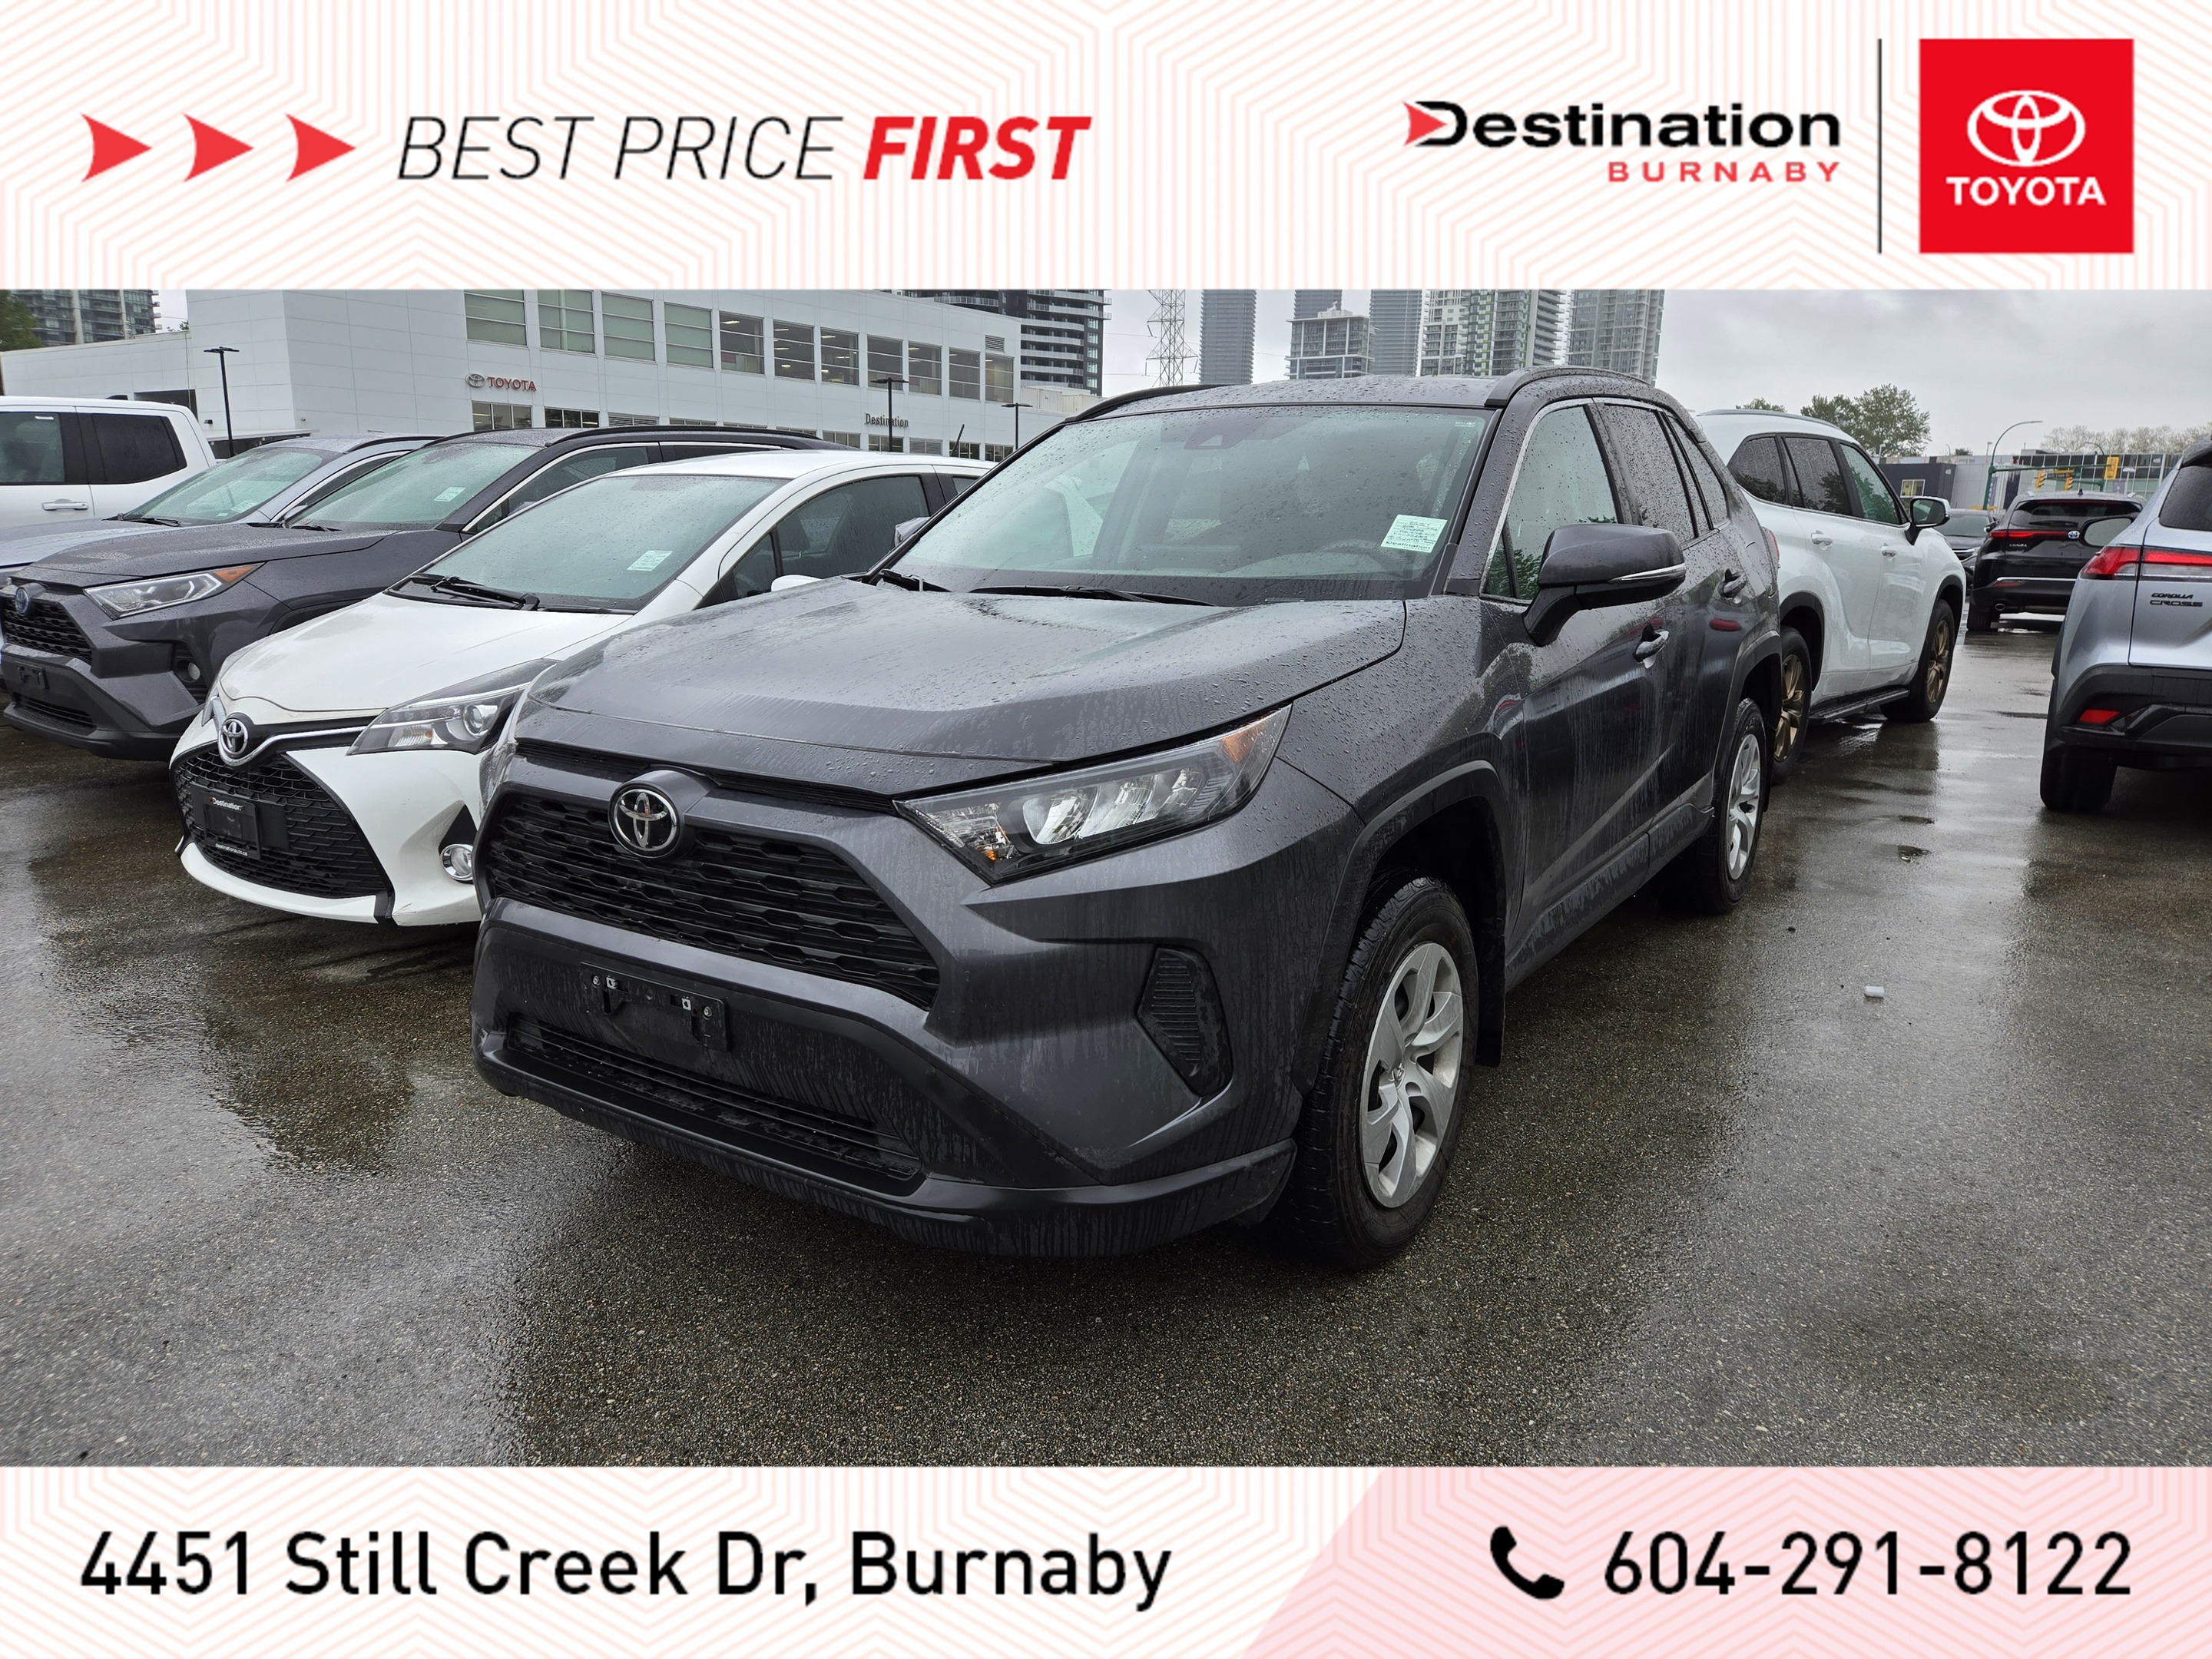 2021 Toyota RAV4 LE AWD - Local, One Owner, No Accidents, Certified